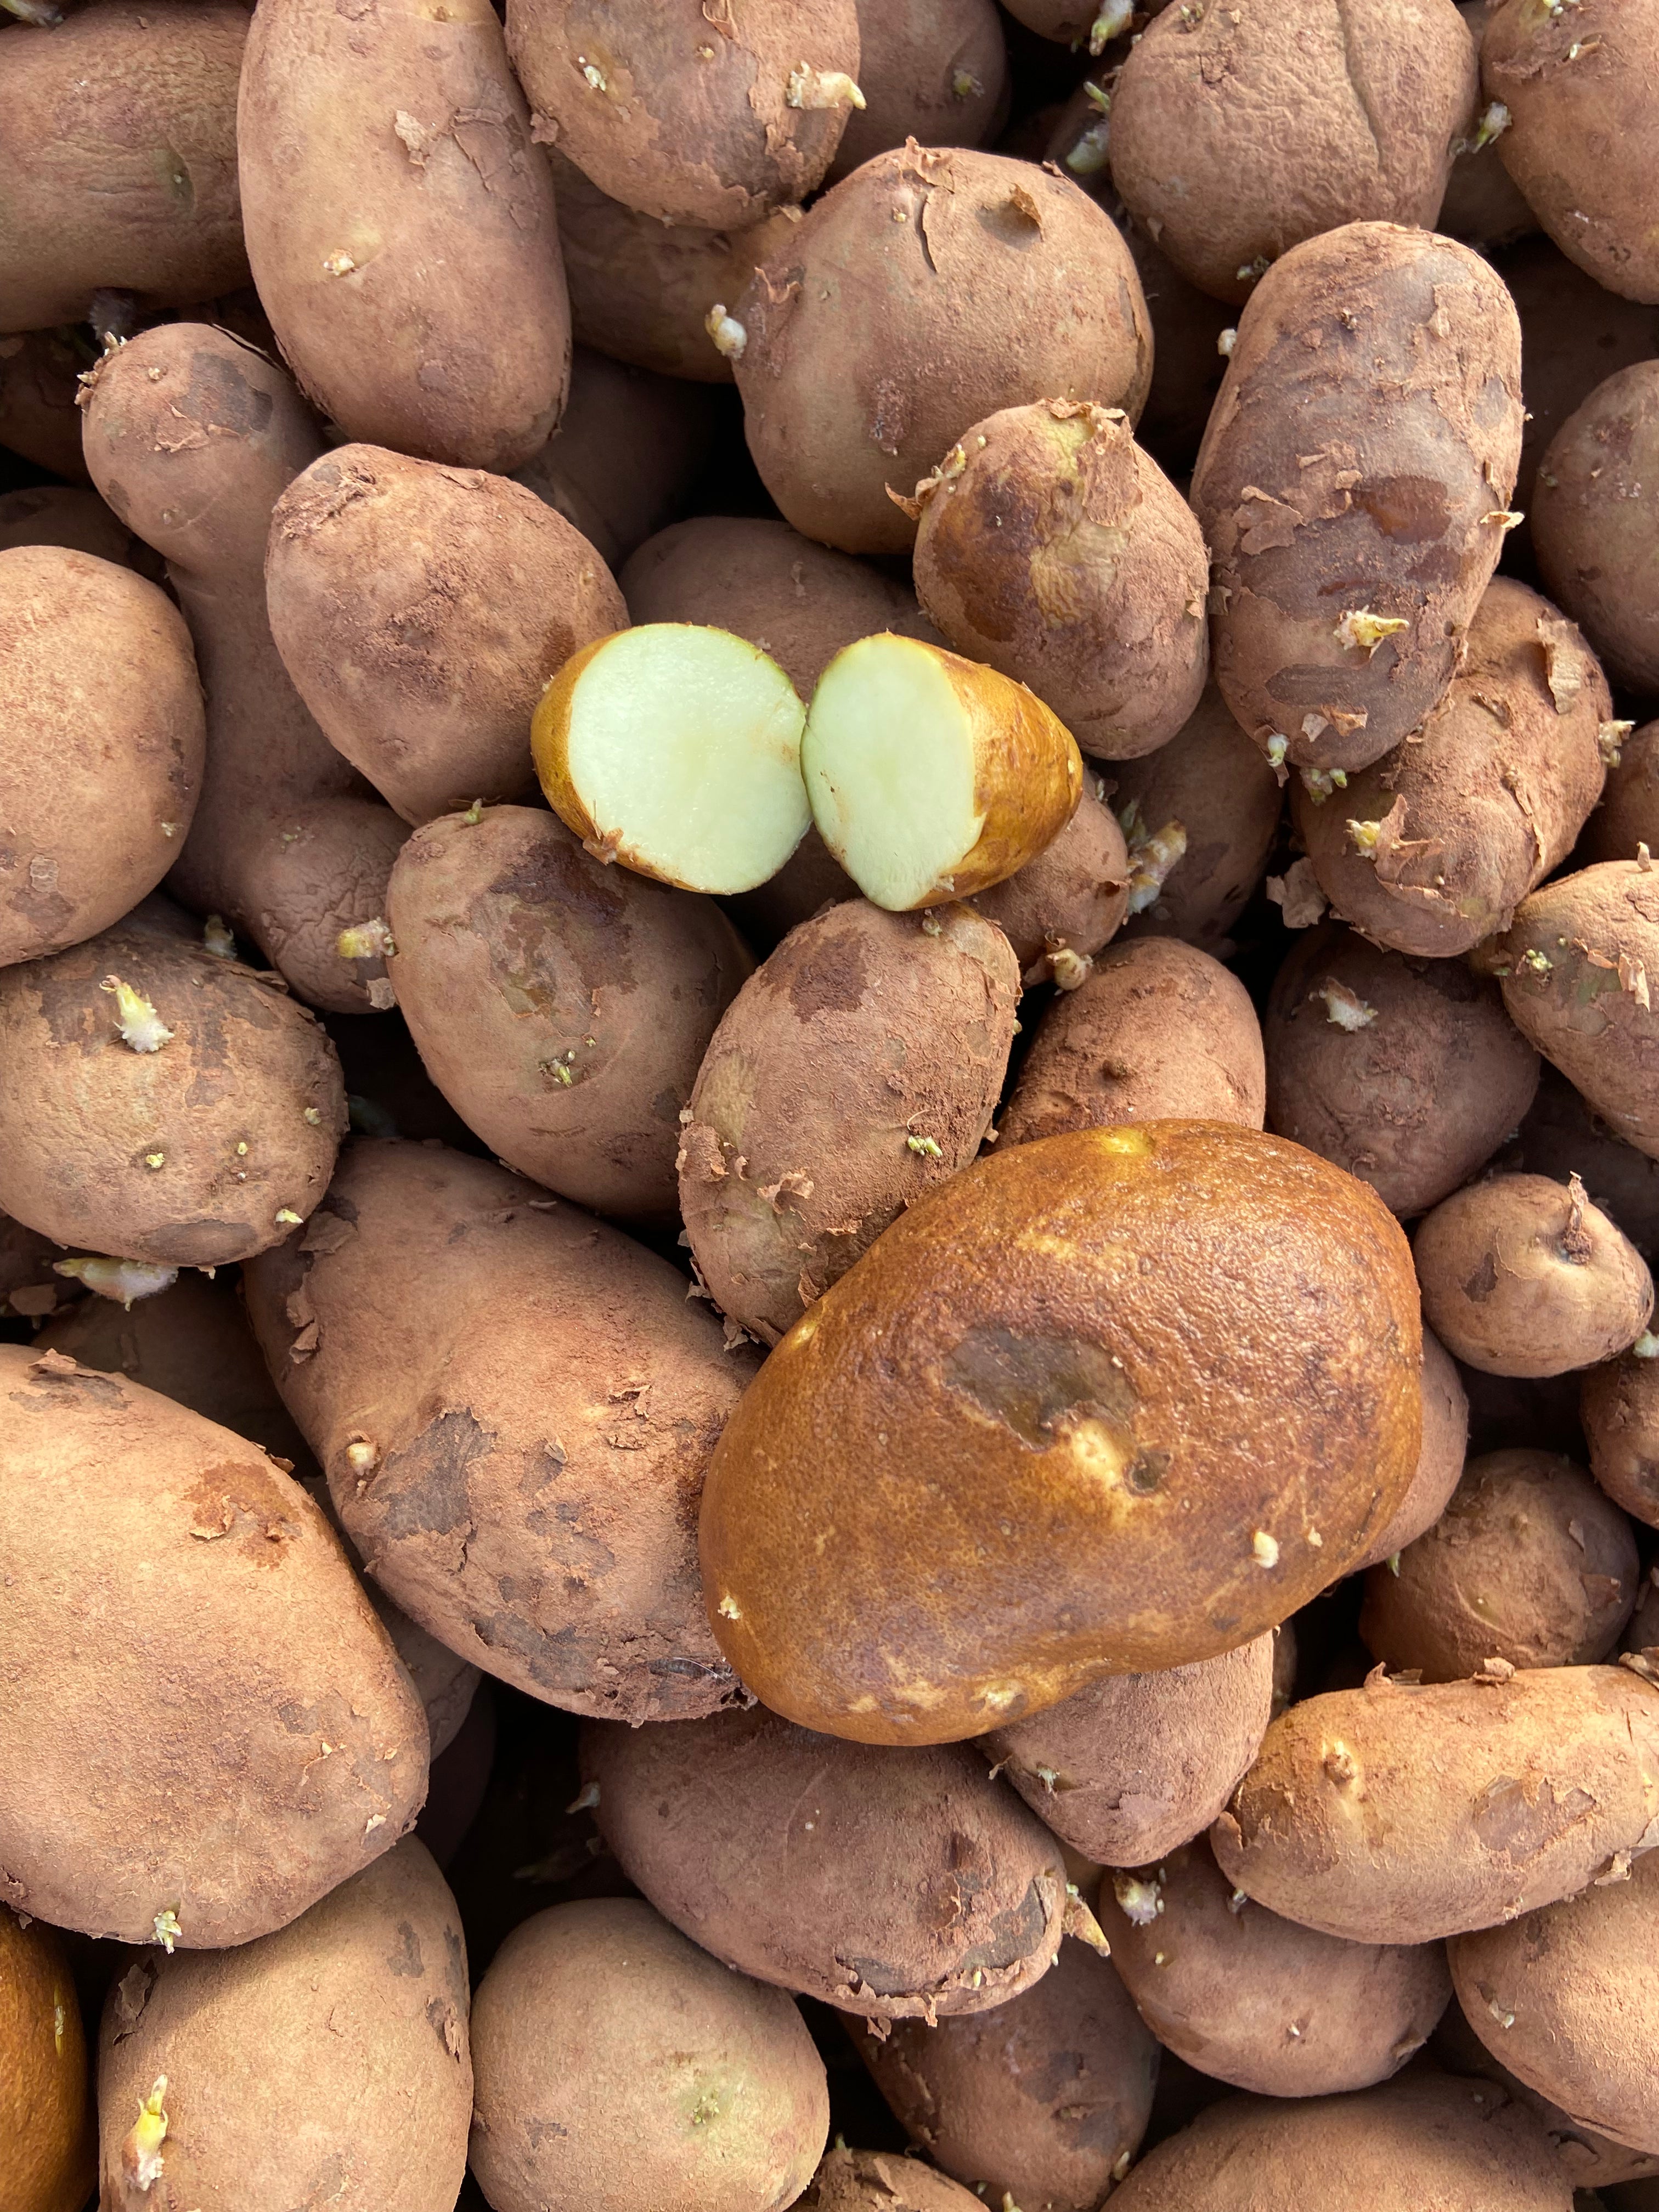 Norkotah Russet Seed Potatoes (non-commercial)